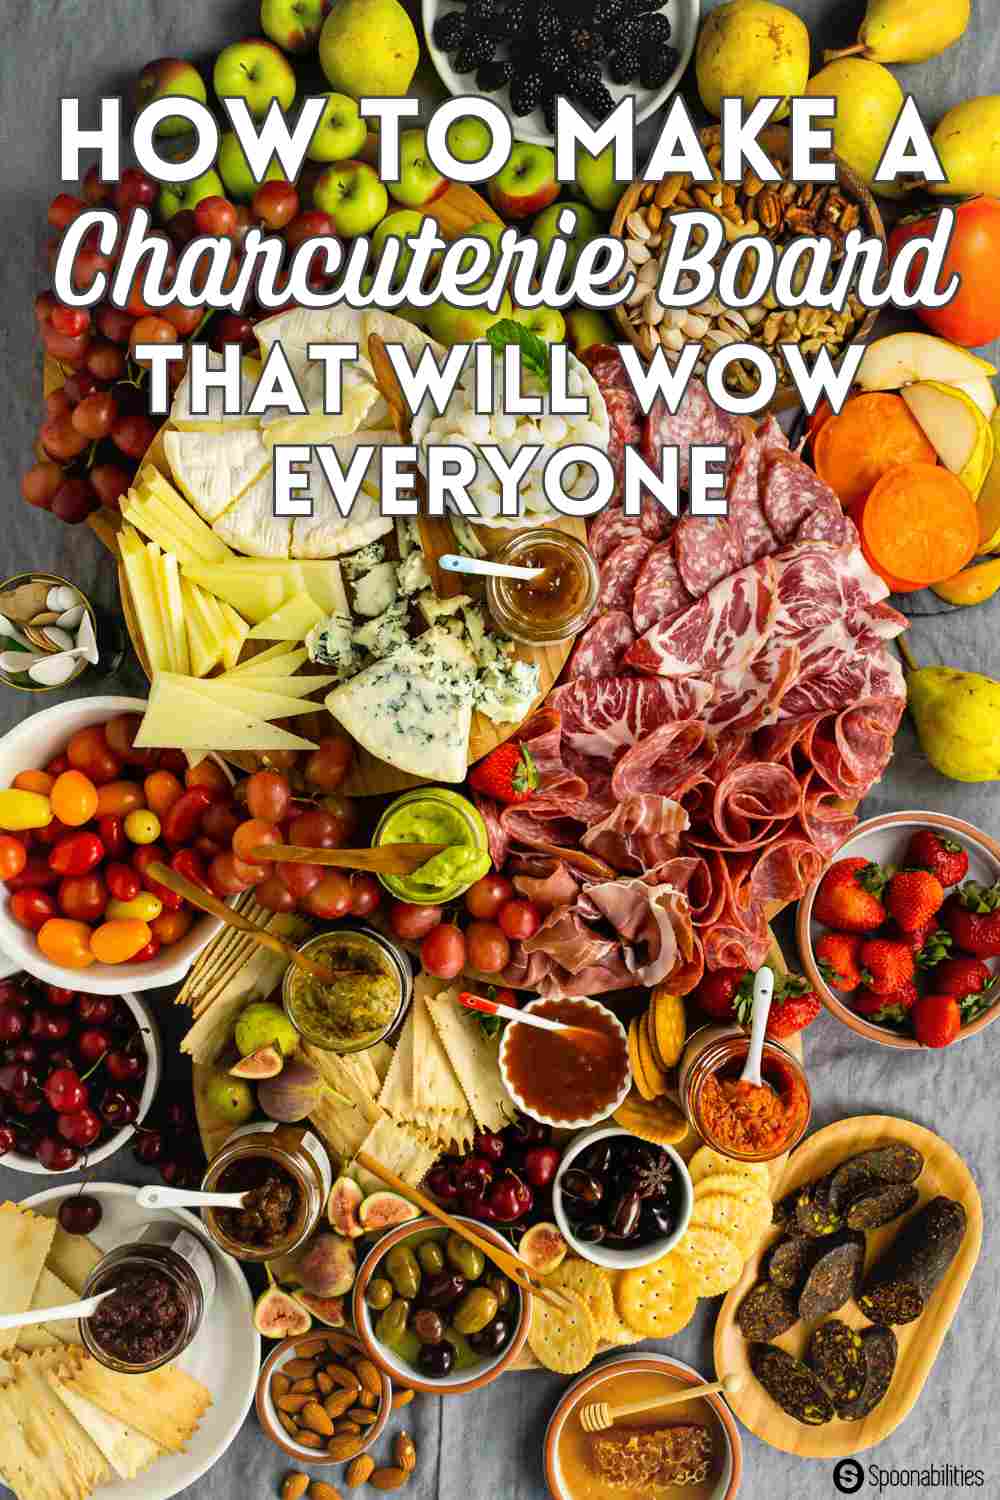 Loaded charcuterie boards with meats, cheeses, fruits, spreads in jars and crackers